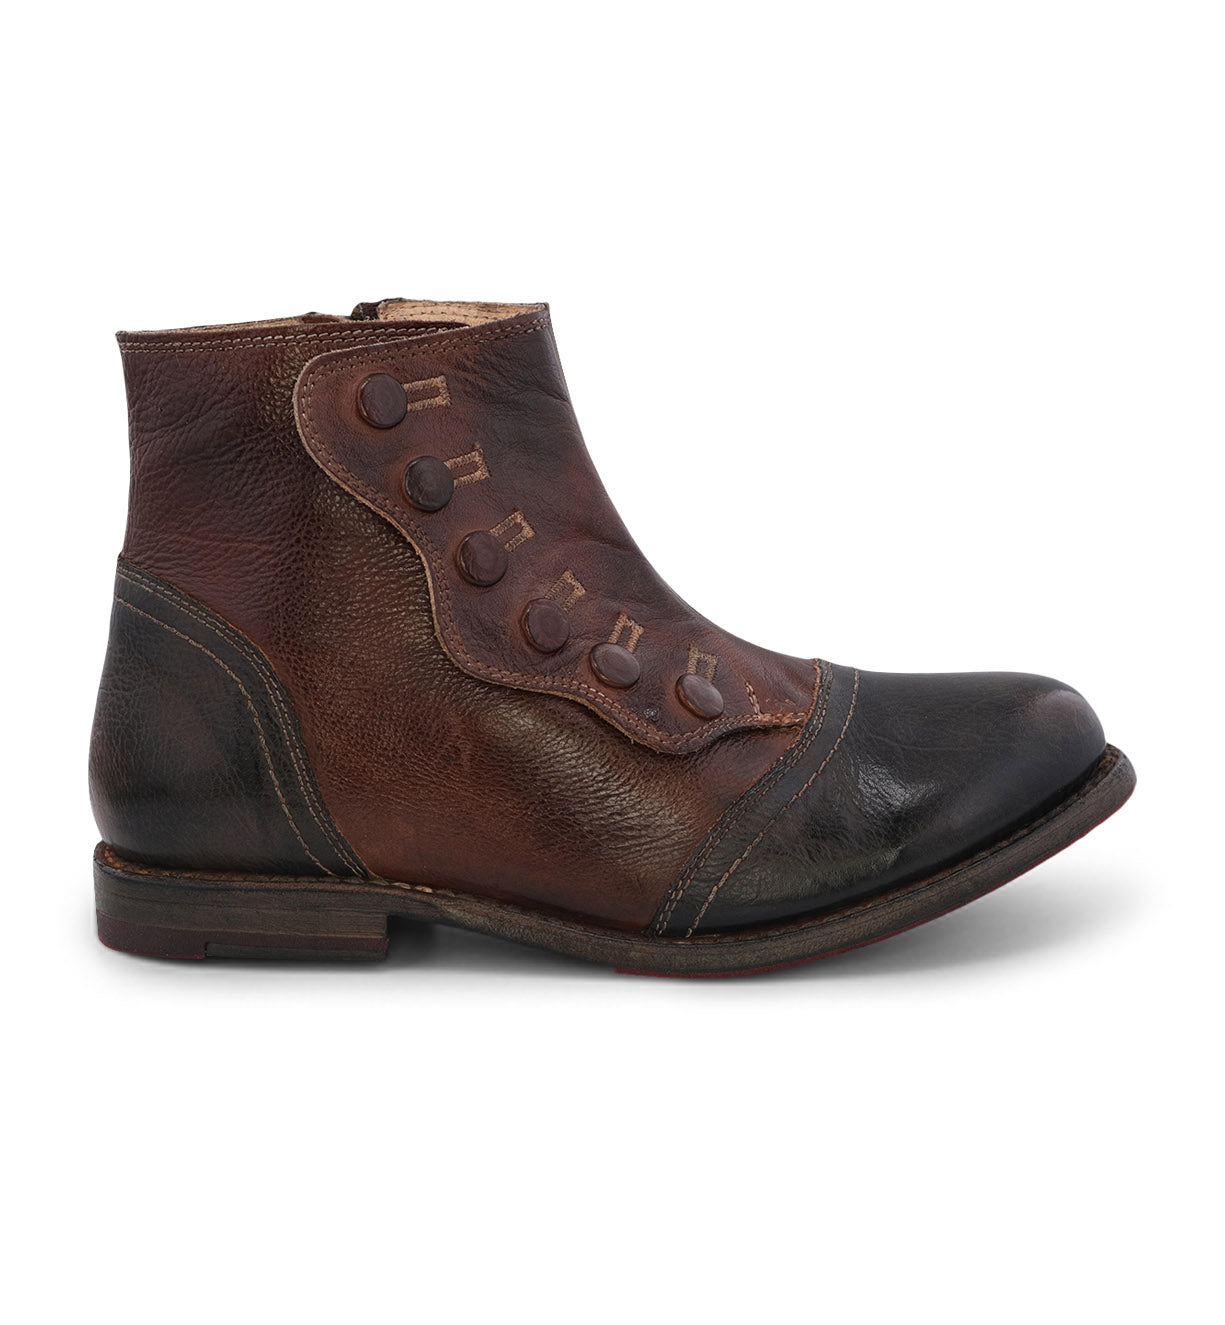 A women's brown leather ankle bootie, the Josephine by Oak Tree Farms, with a YKK zipper.